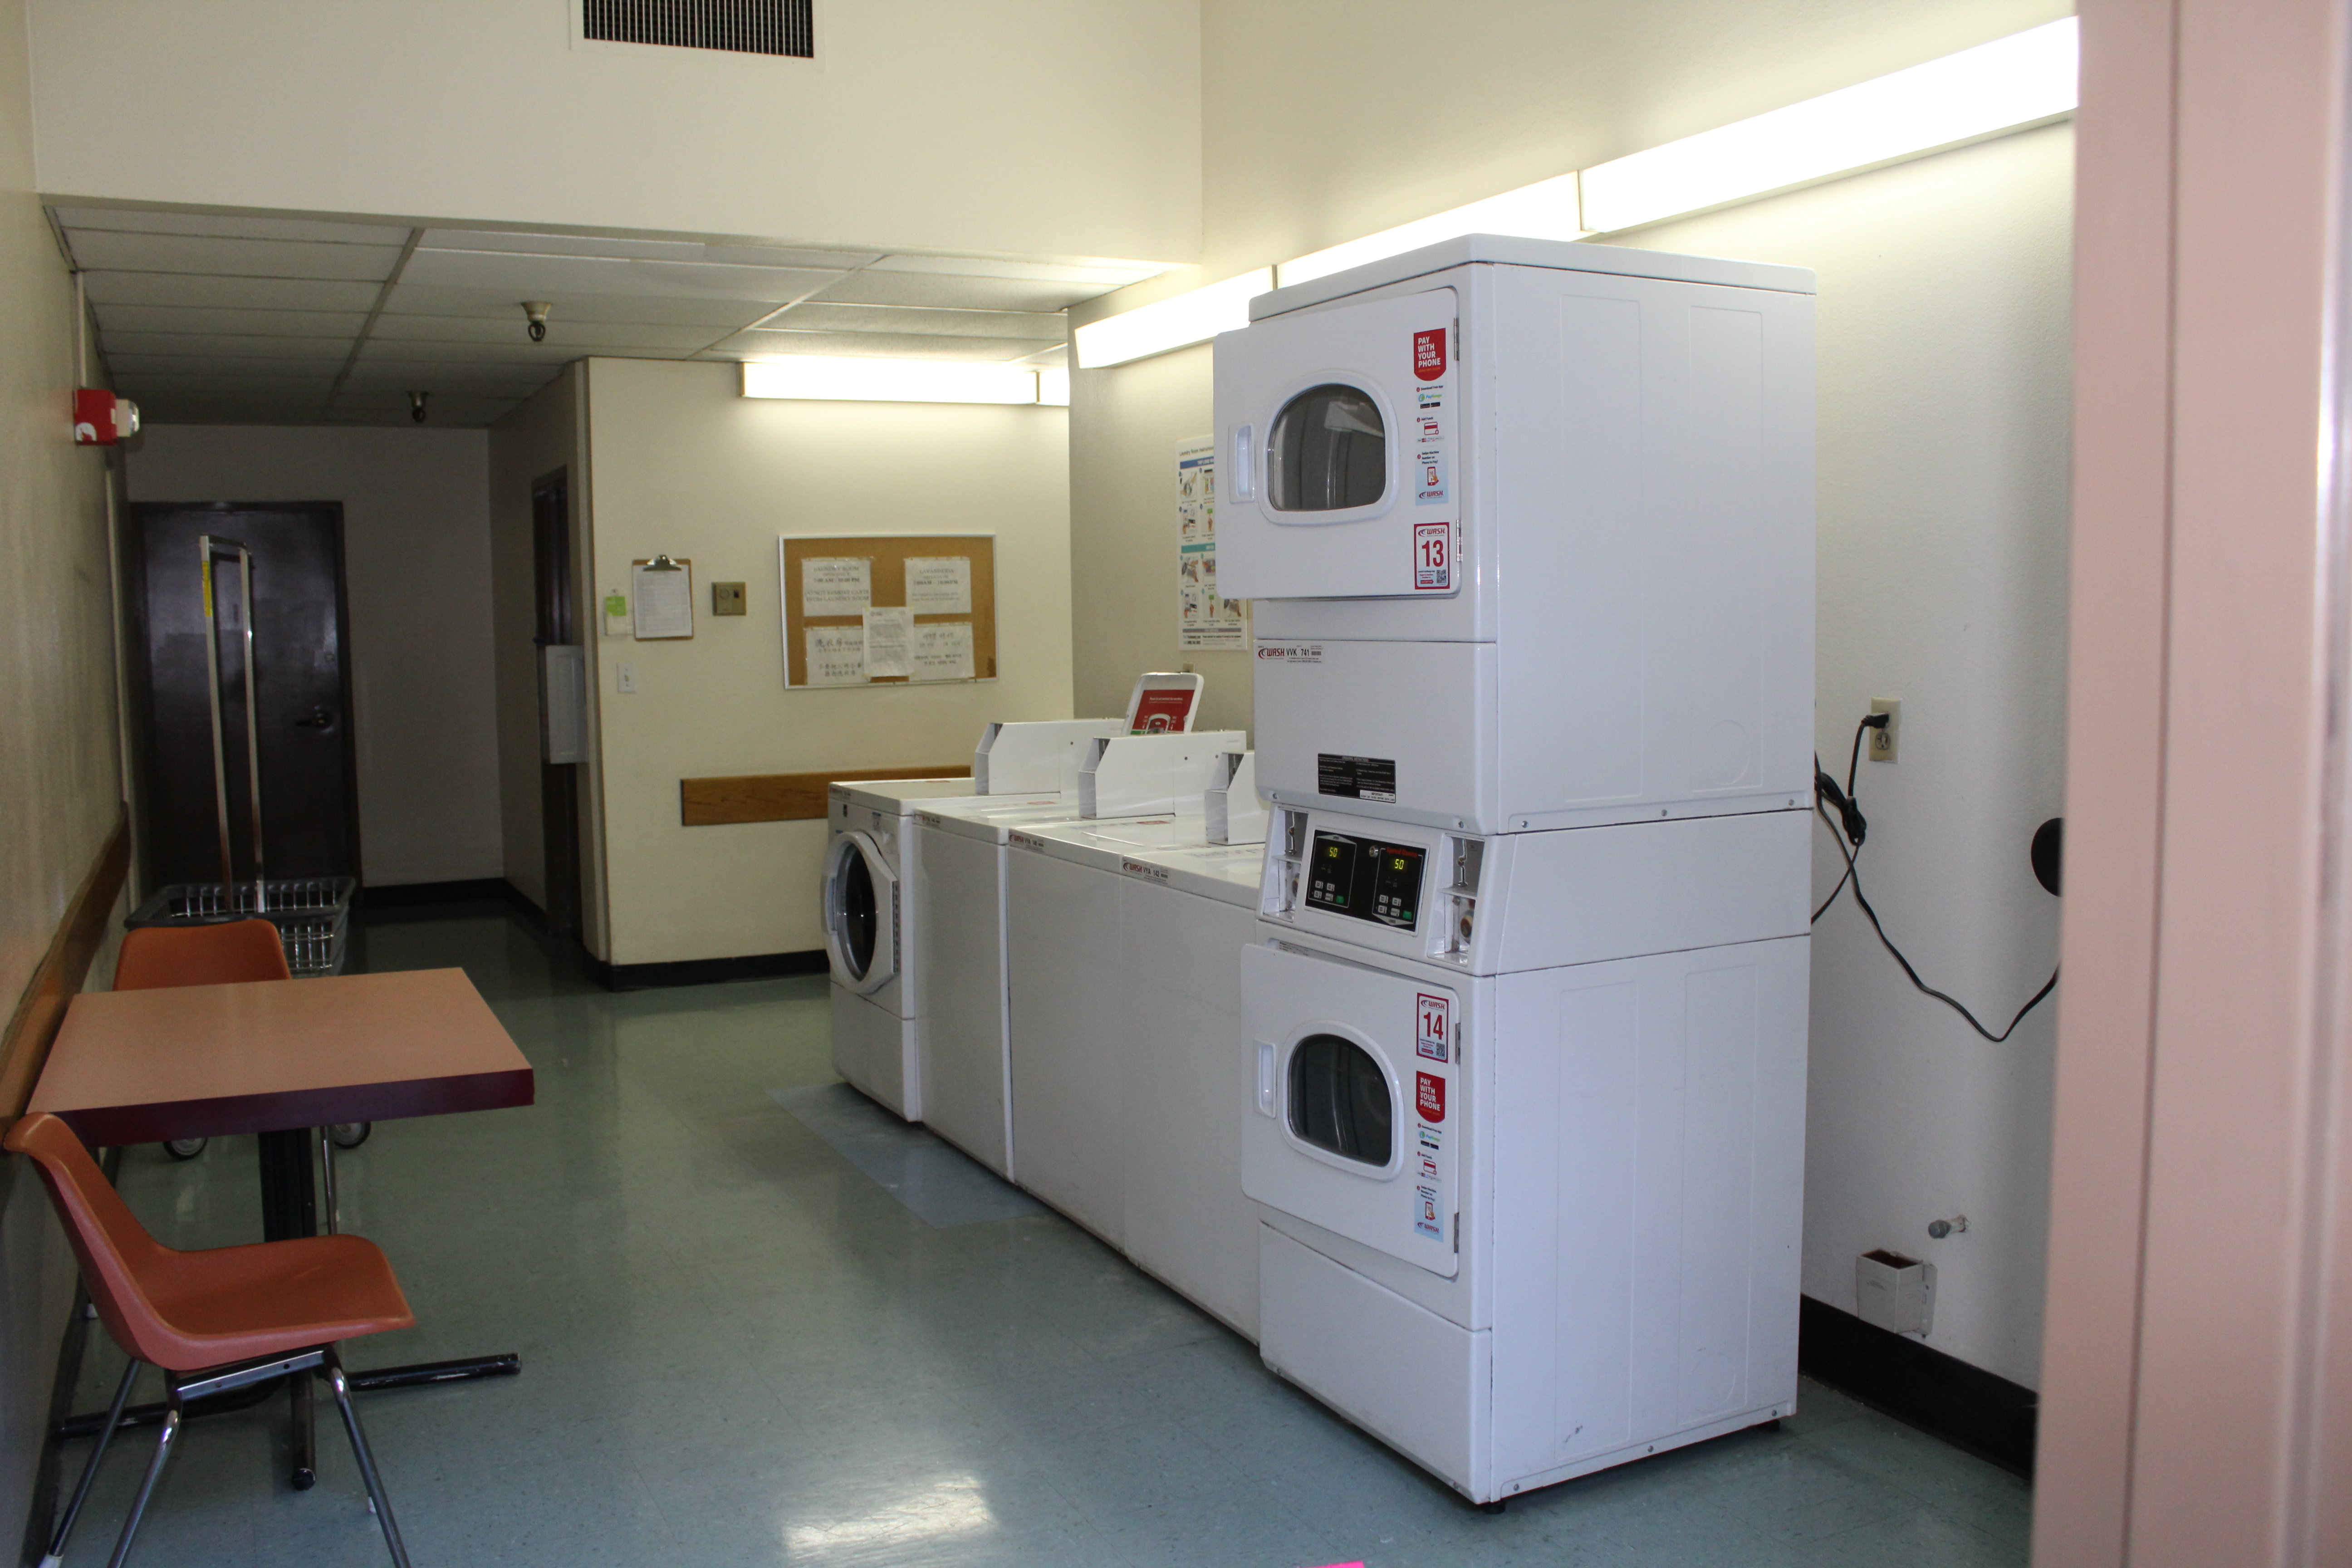 Interior view of a laundry room for Angelus Plaza 1. Three white washers and three white dryers, a square table with two chairs in a rectangular room.